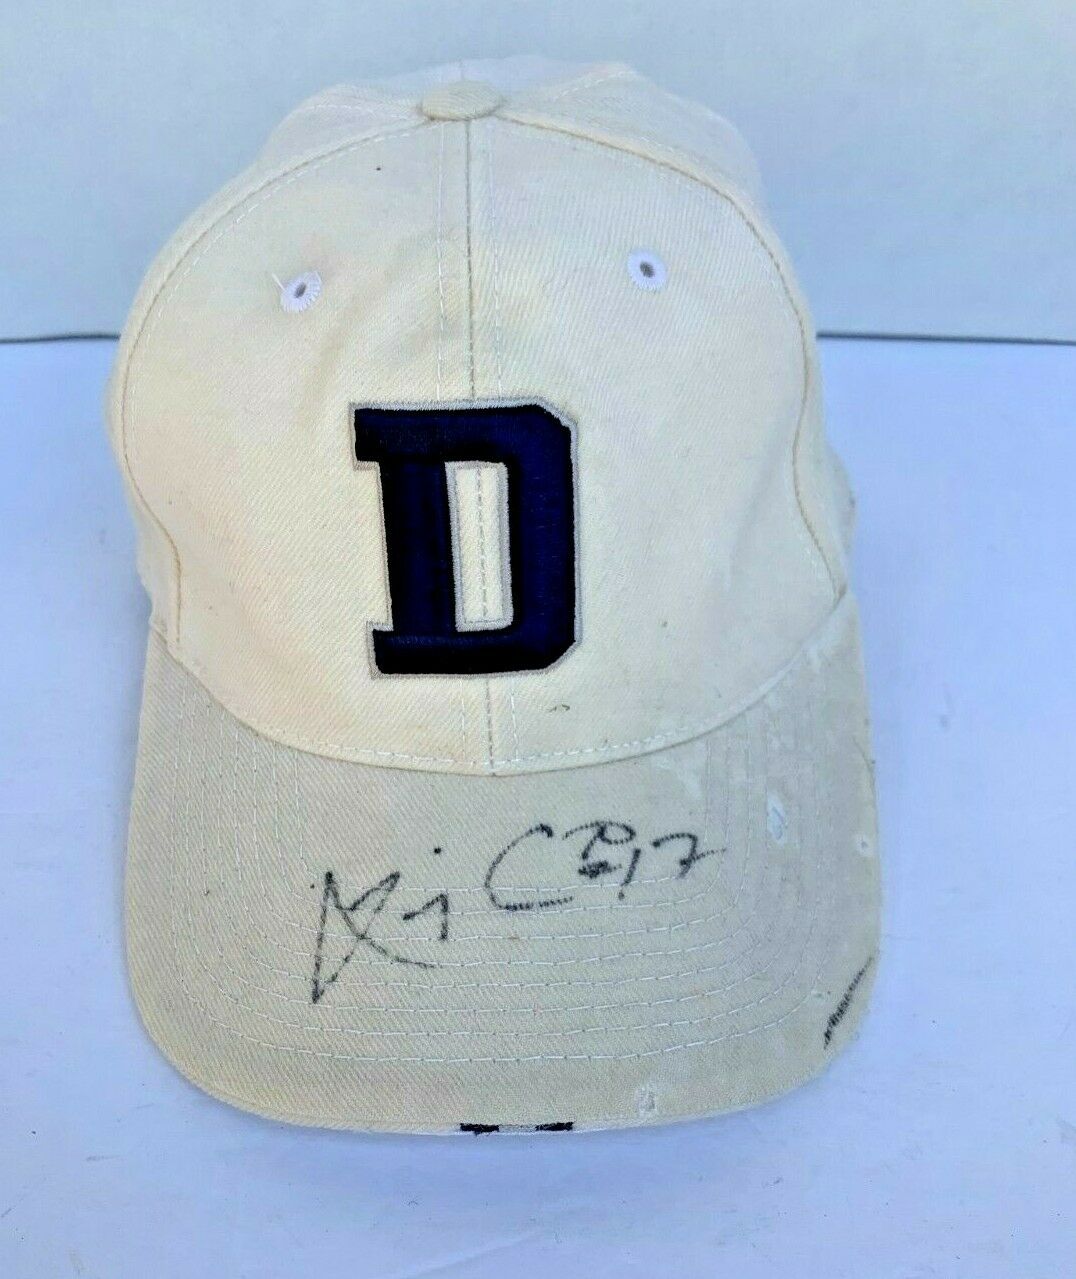 Quincy Carter #17 Dallas Cowboys Autographed Signed Baseball Hat